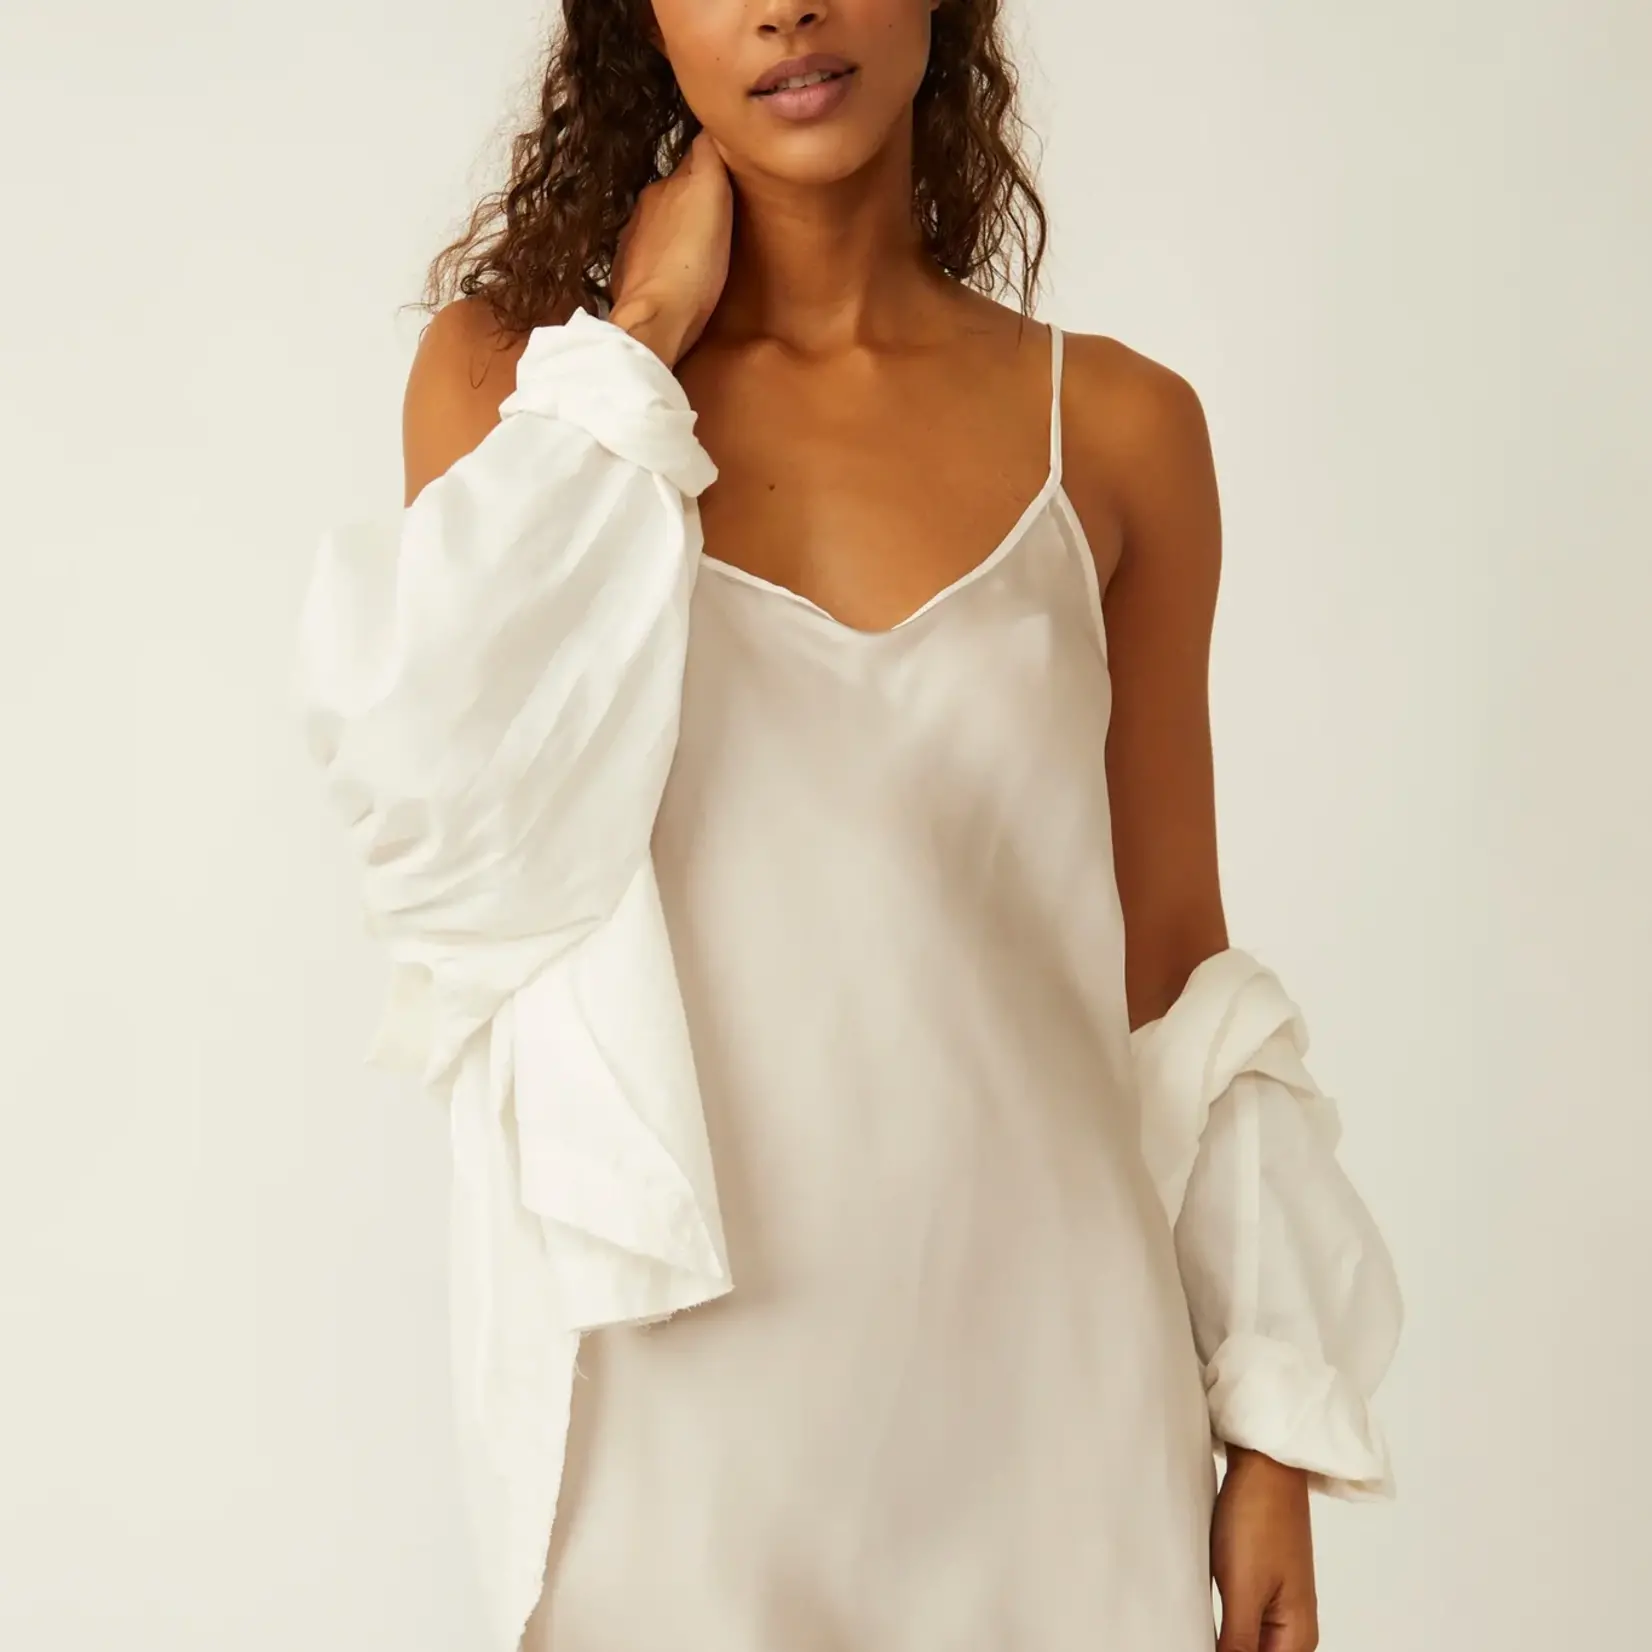 Free People Just What You Need Mini Slip